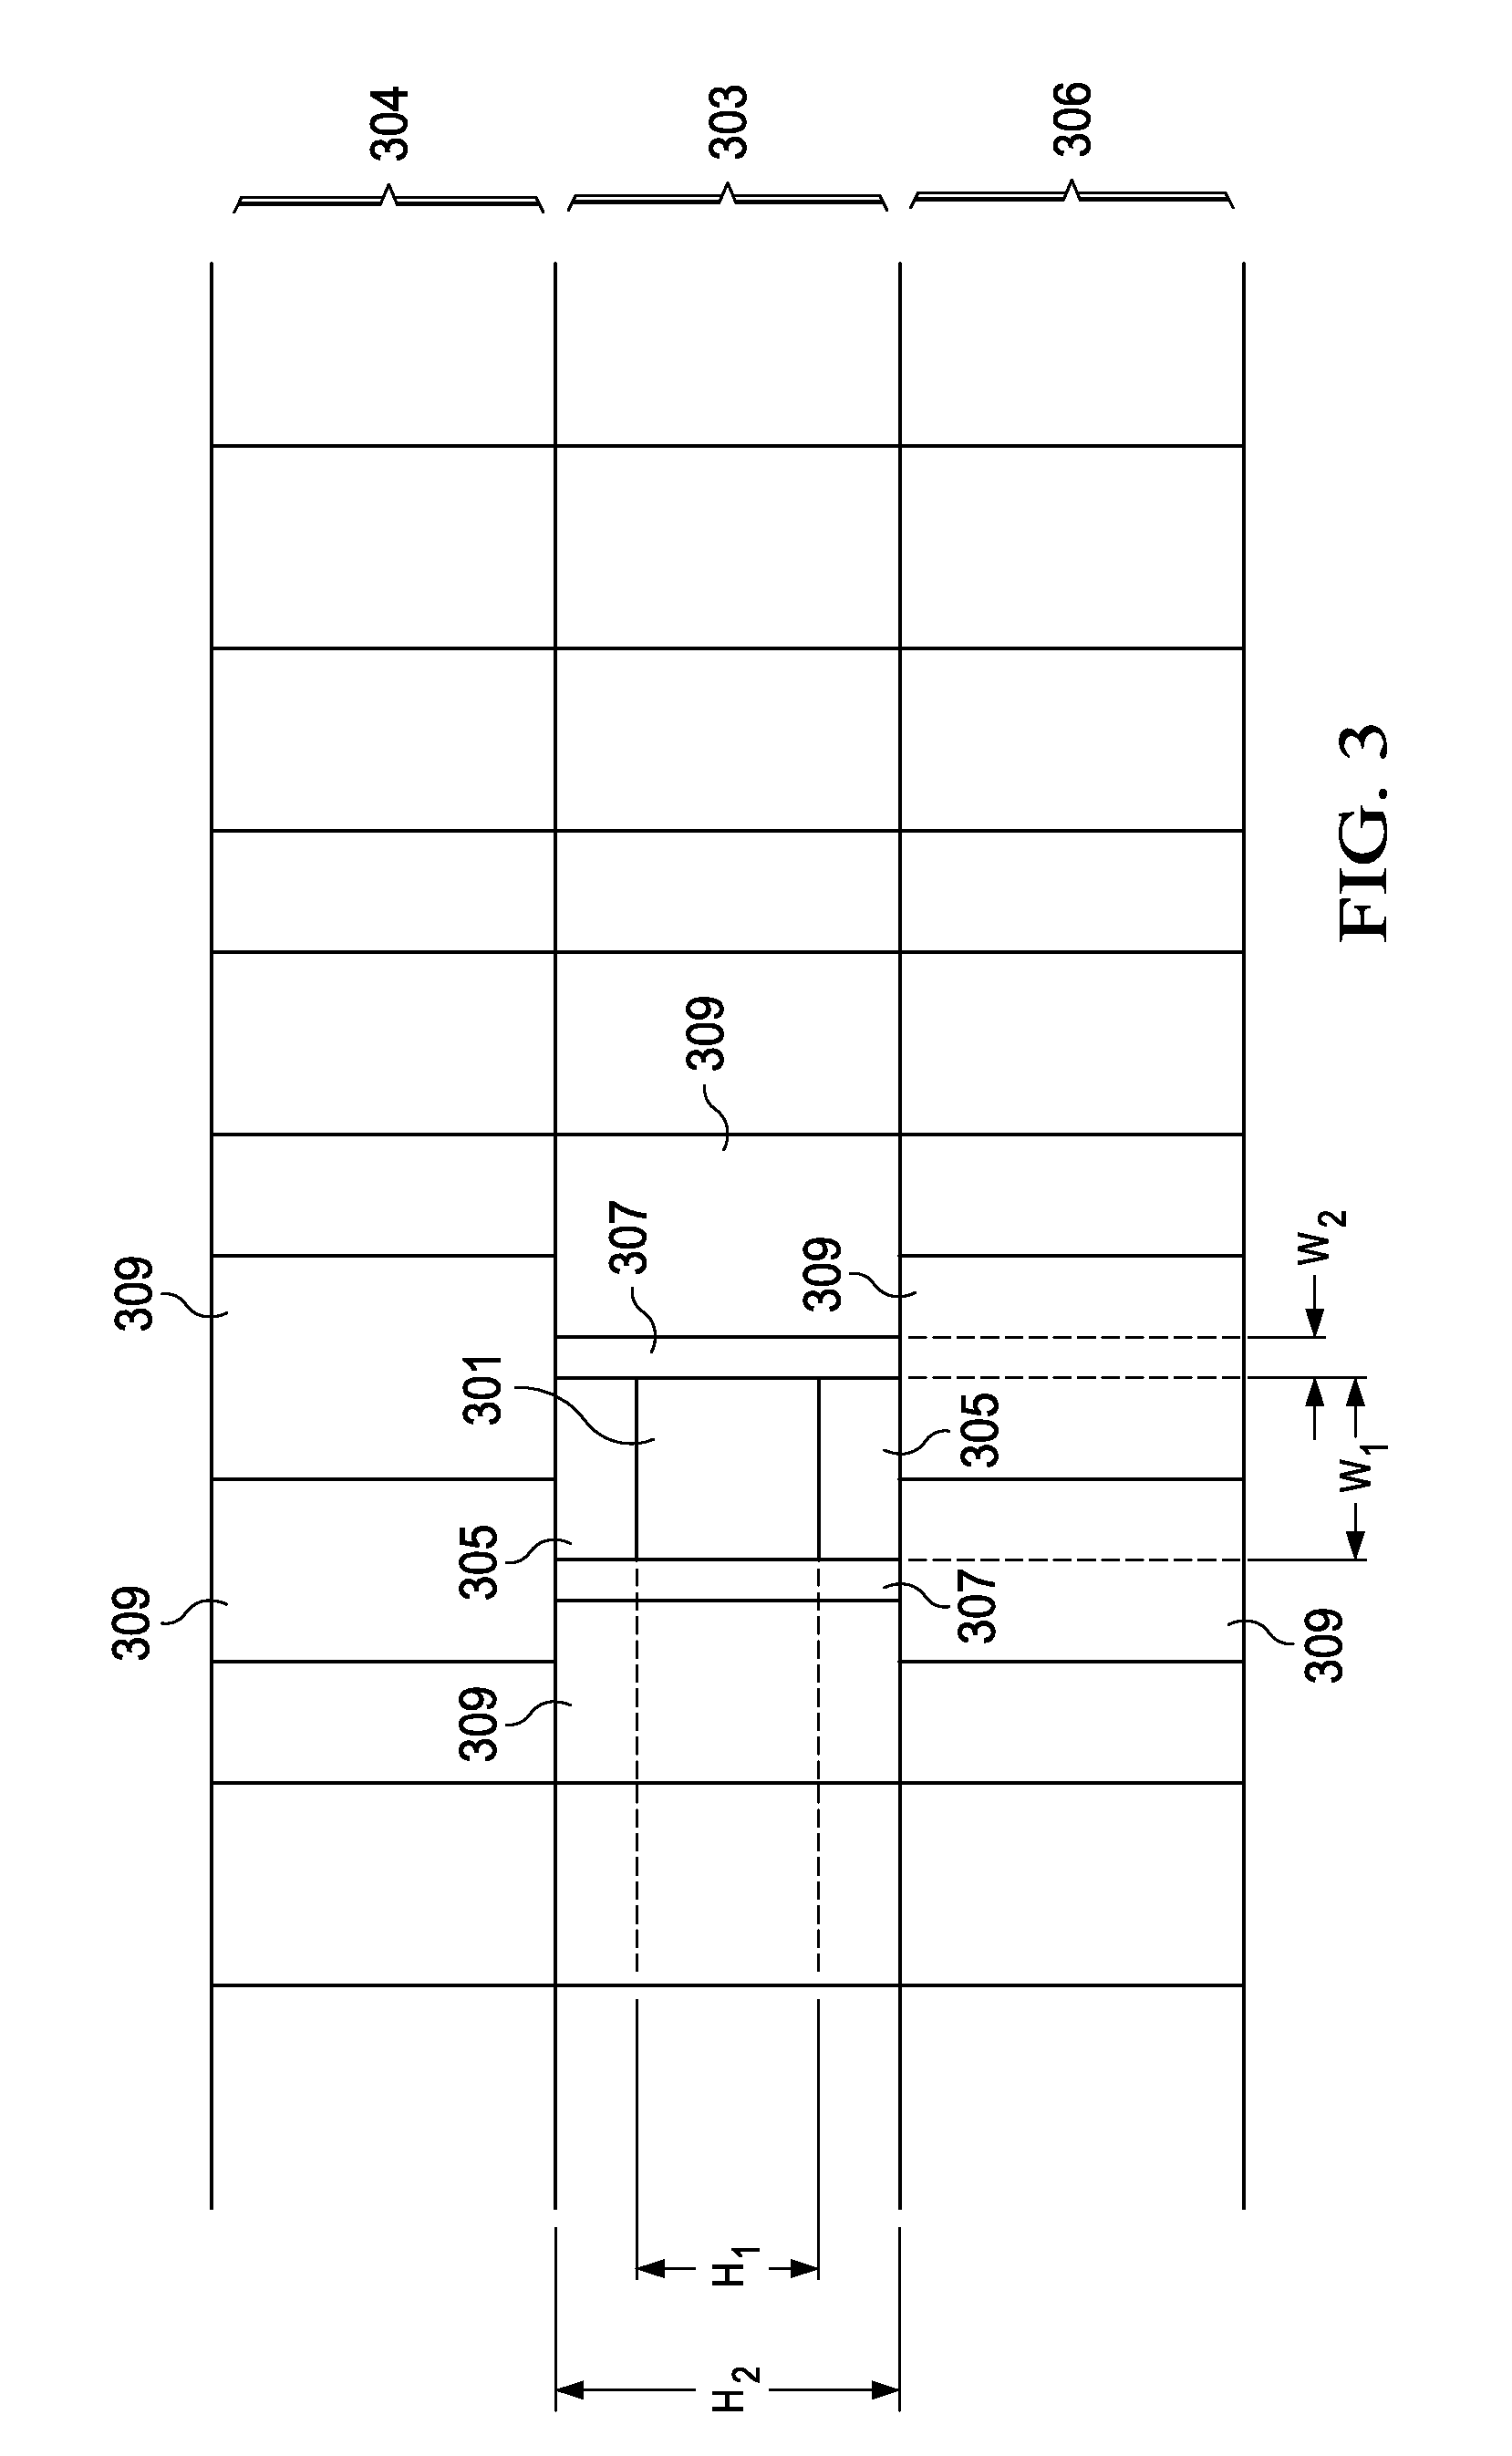 System and method for designing cell rows with differing cell heights